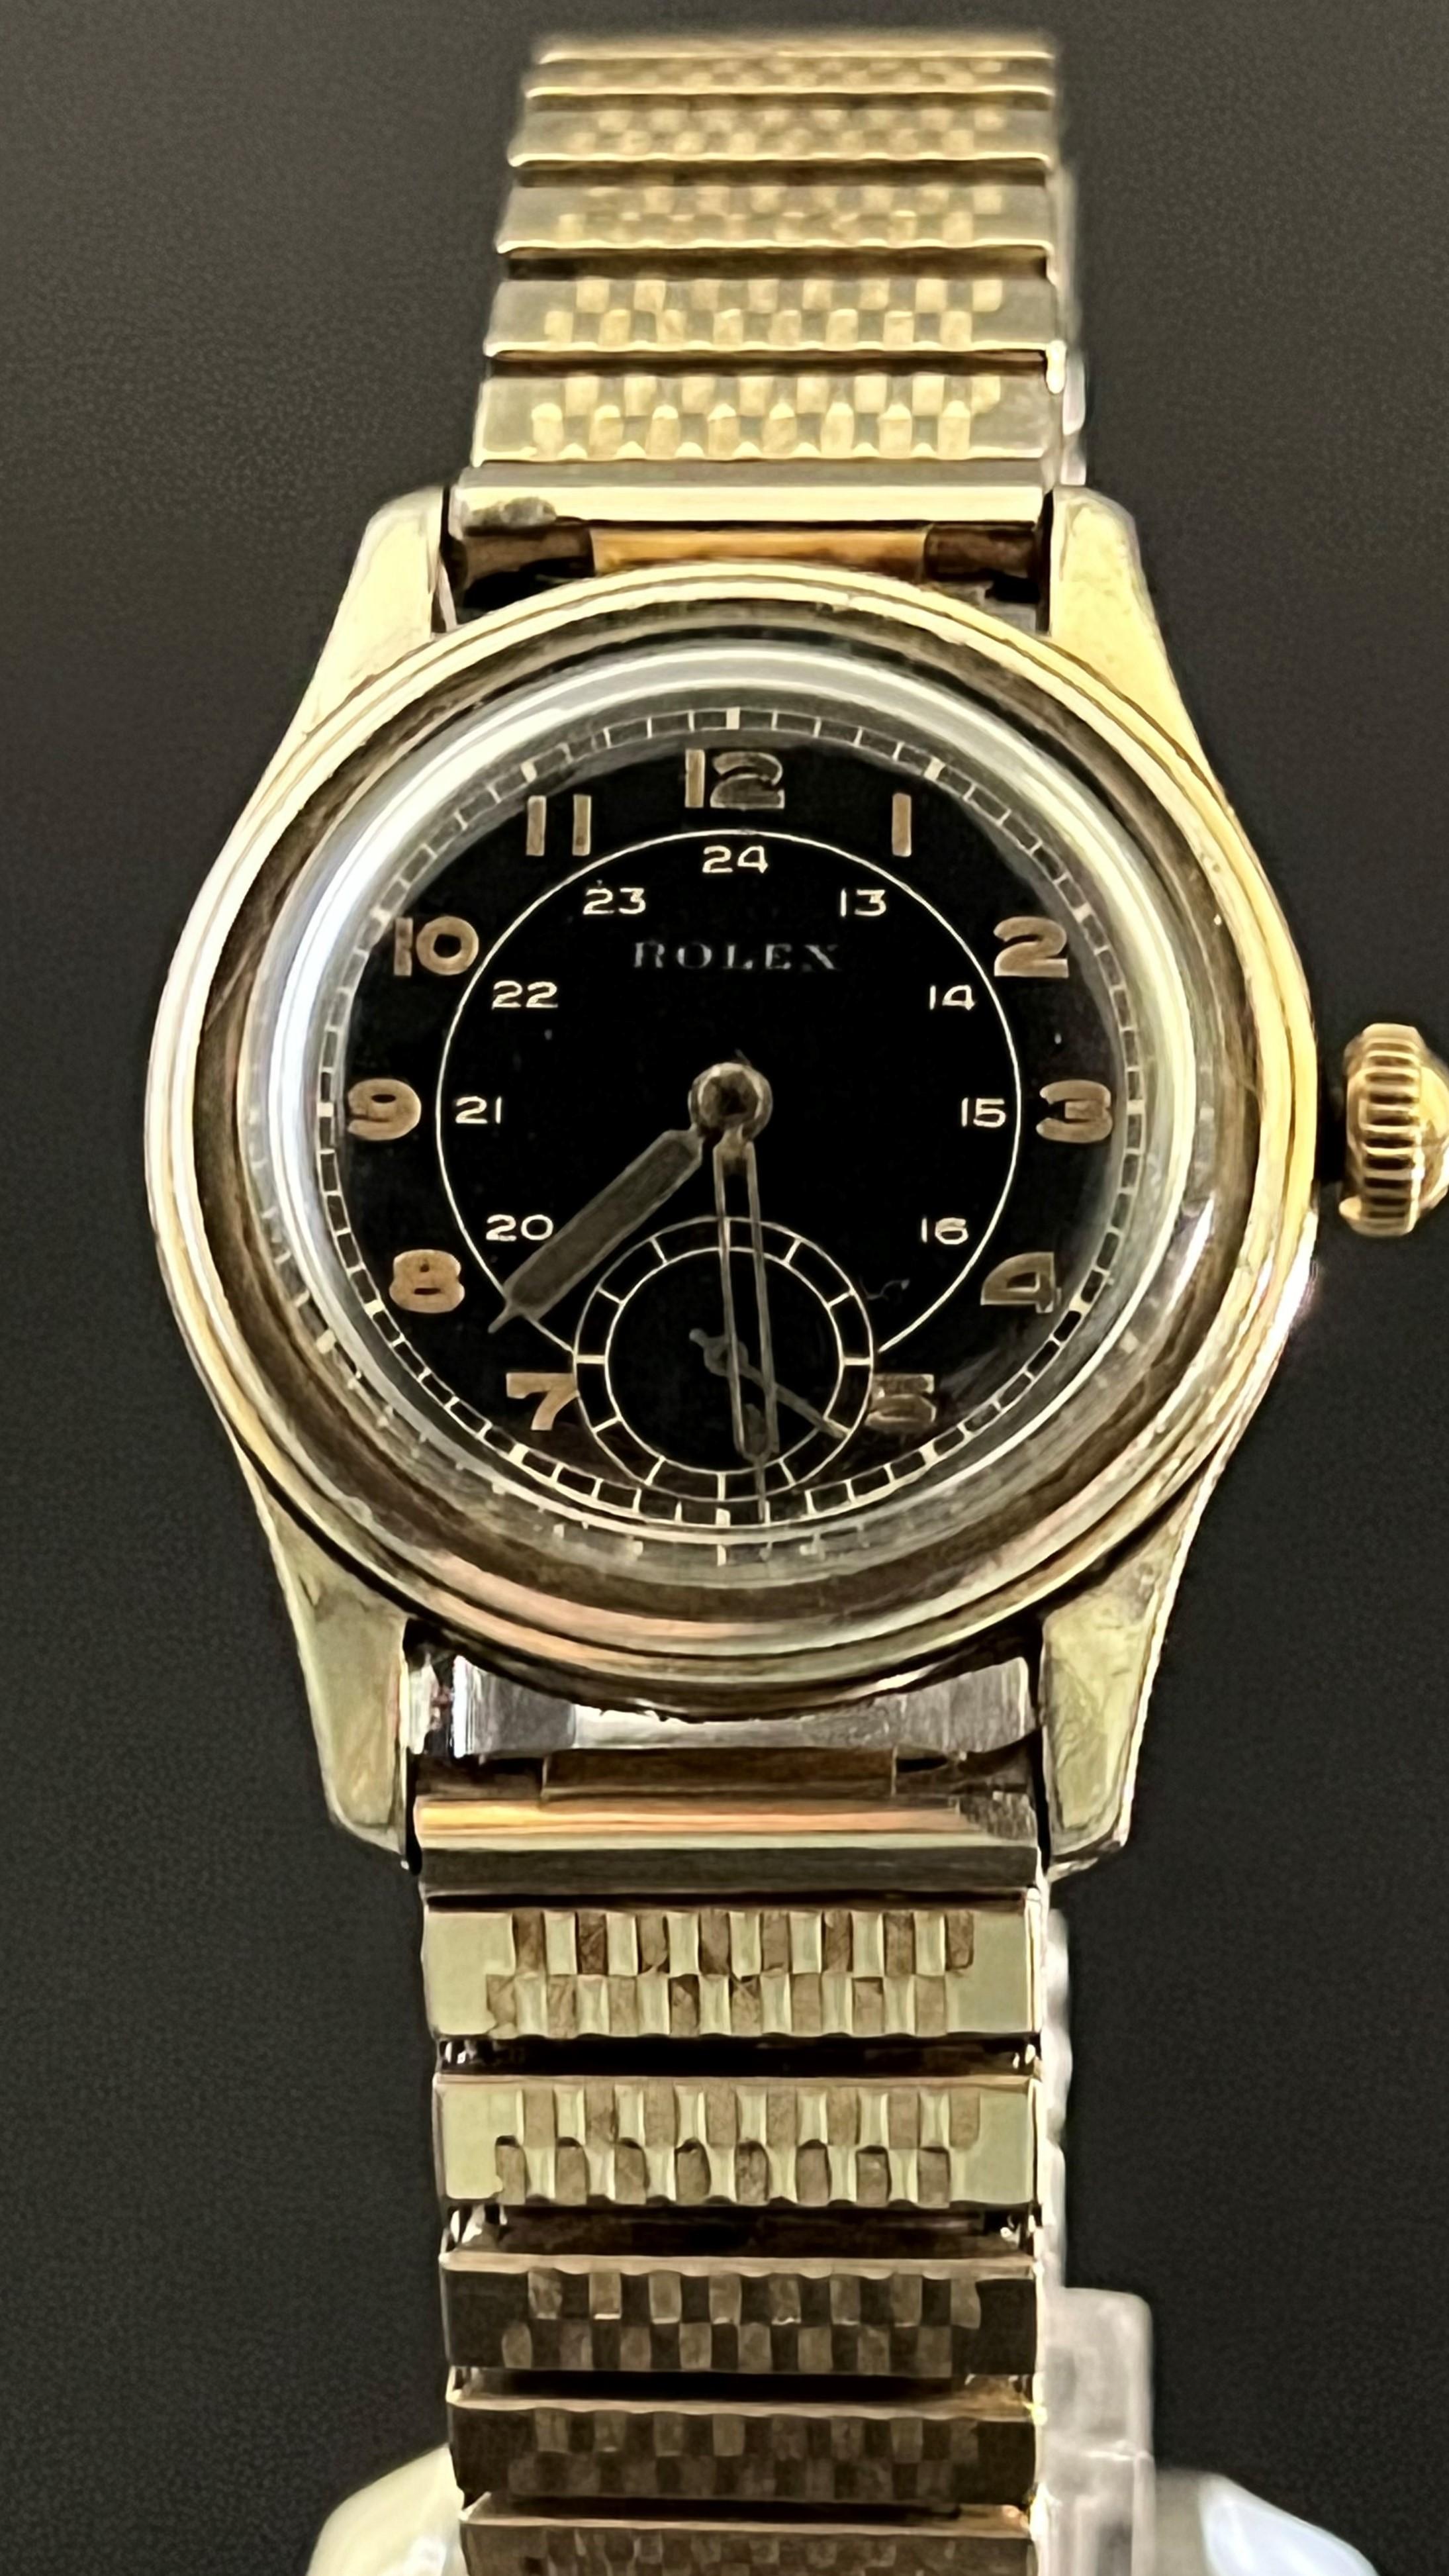 Authentic men’s WW2 era Rolex wristwatch. With black radar dial. The back bezel with ¼ century inscription and date 1917. Believed to have started indicating a watch date of c1942.

Size: The watch circumference is approximately 6” round, and the